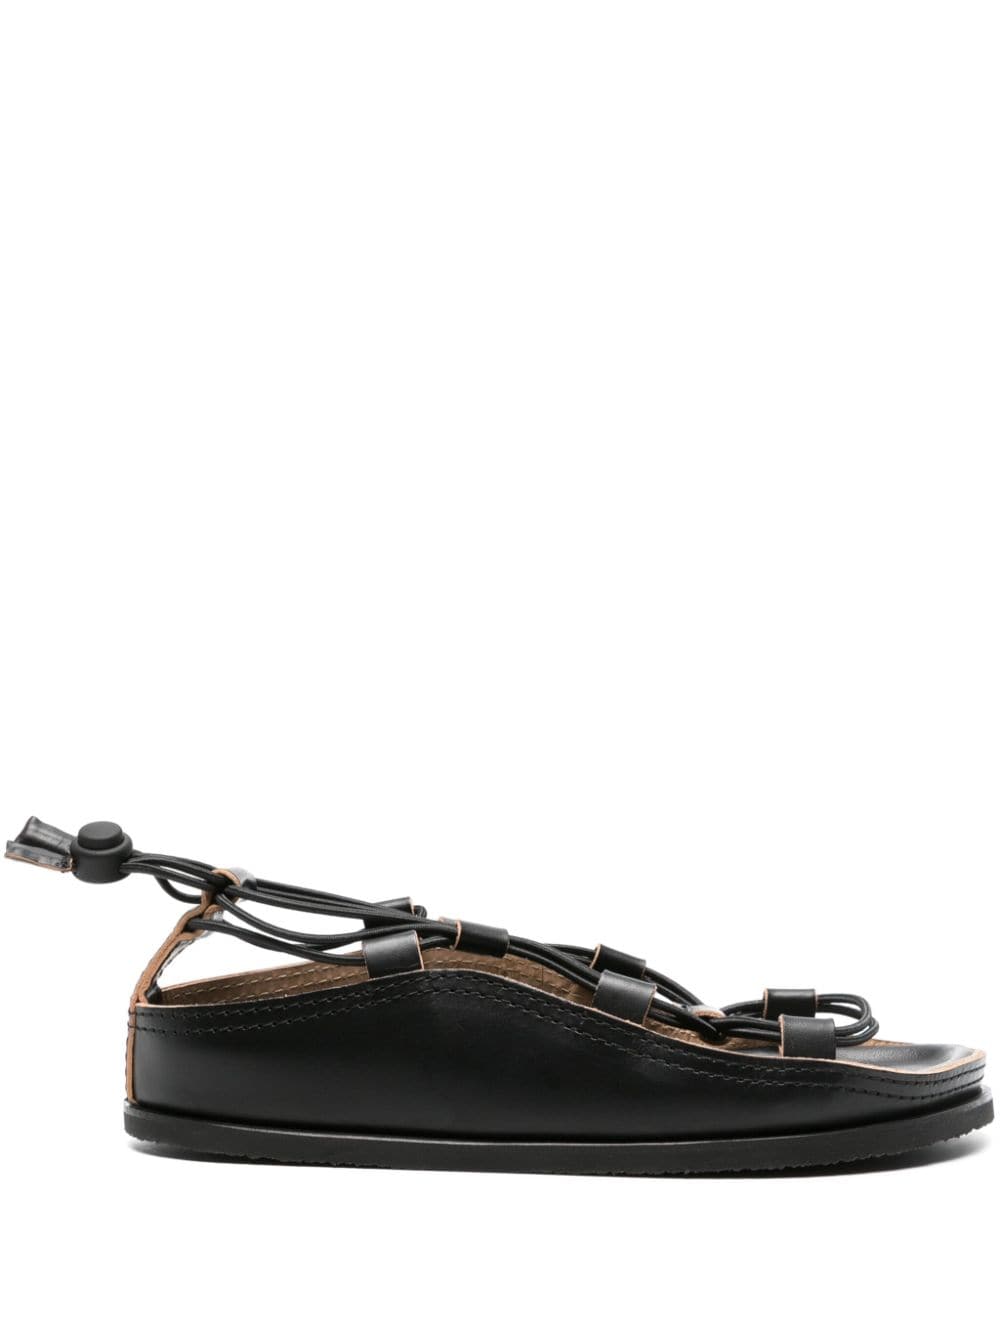 LEMAIRE MULTI-WAY STRAP LEATHER SANDALS